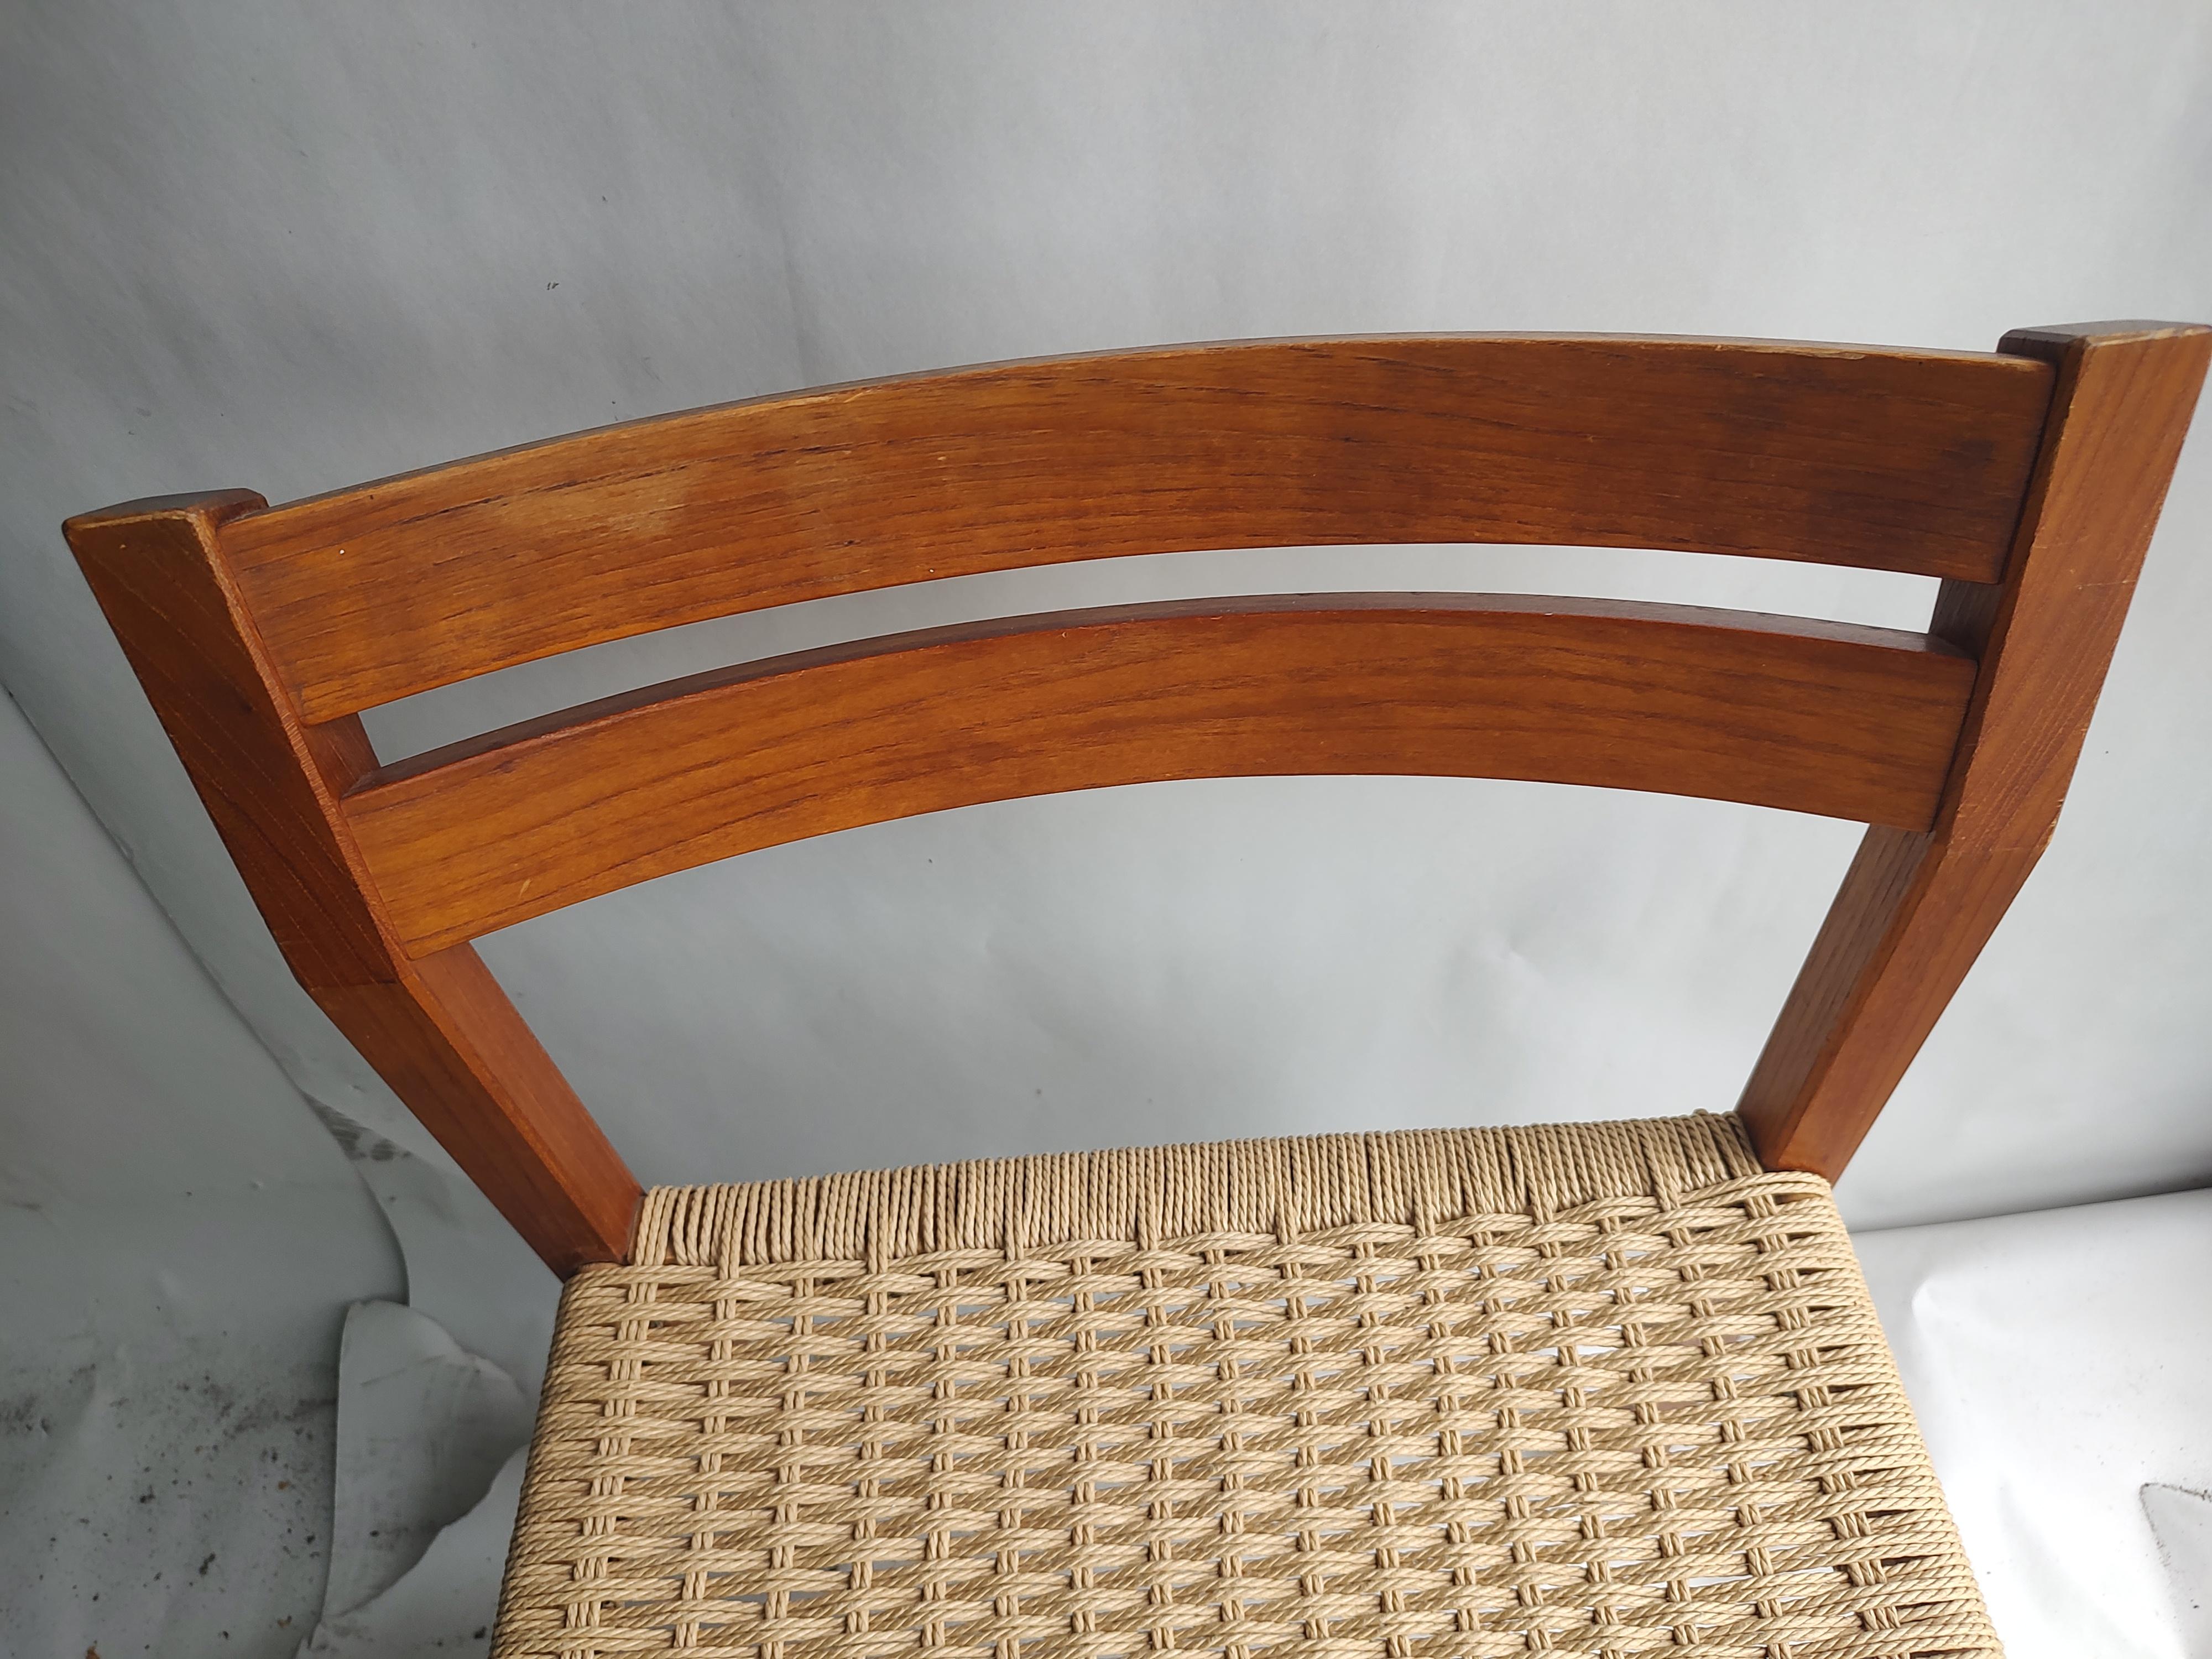 Late 20th Century Mid-Century Modern Danish Teak Desk Dining Chair Rope Seat by Niels Moller C1970